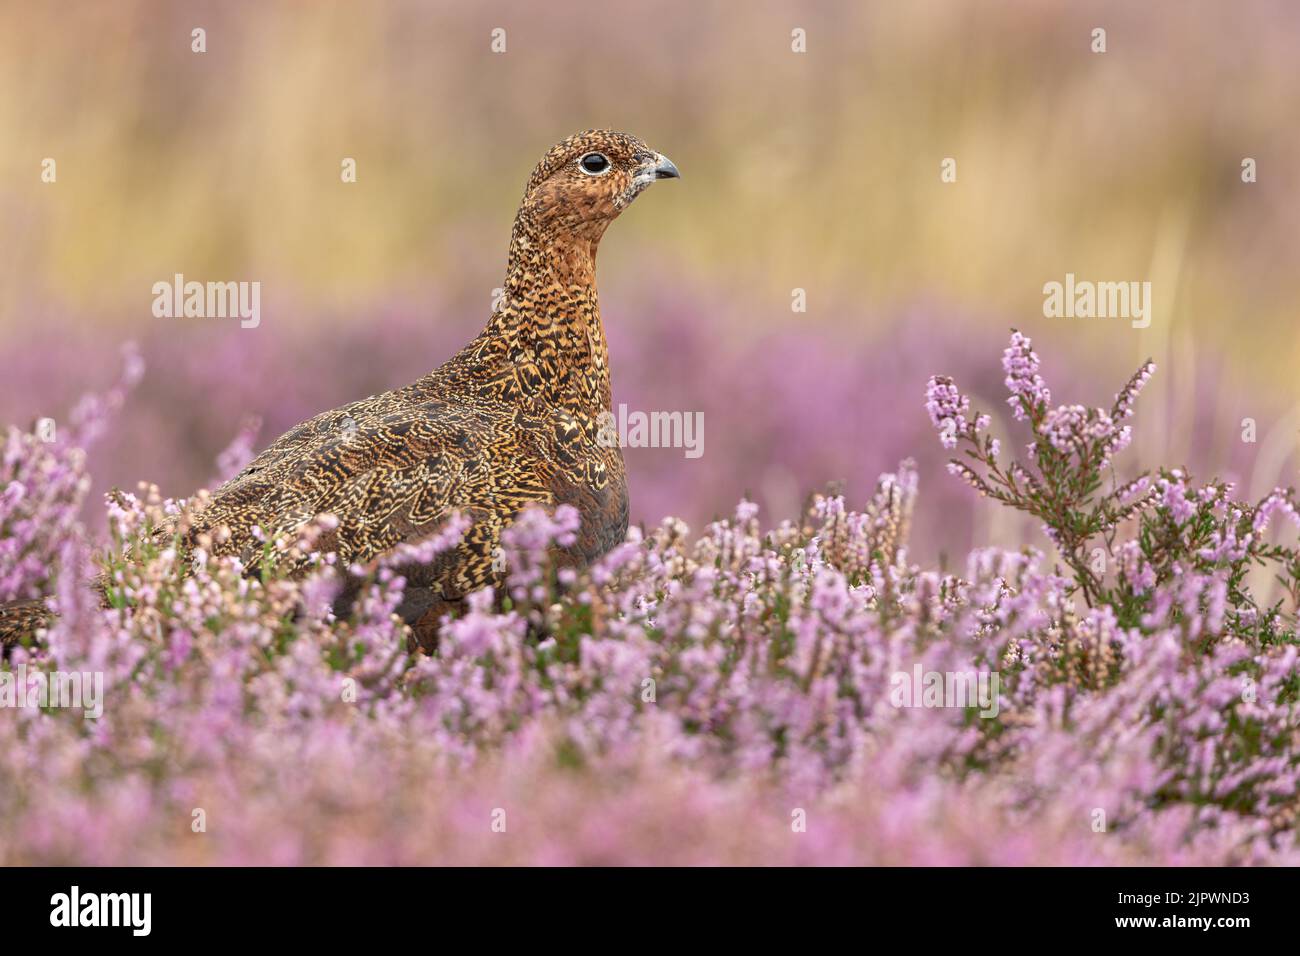 Close up of a Red Grouse in late summer when the heather is in full bloom. Alert and facing right.  Scientific name: Lagopus Lagopus. Clean background Stock Photo